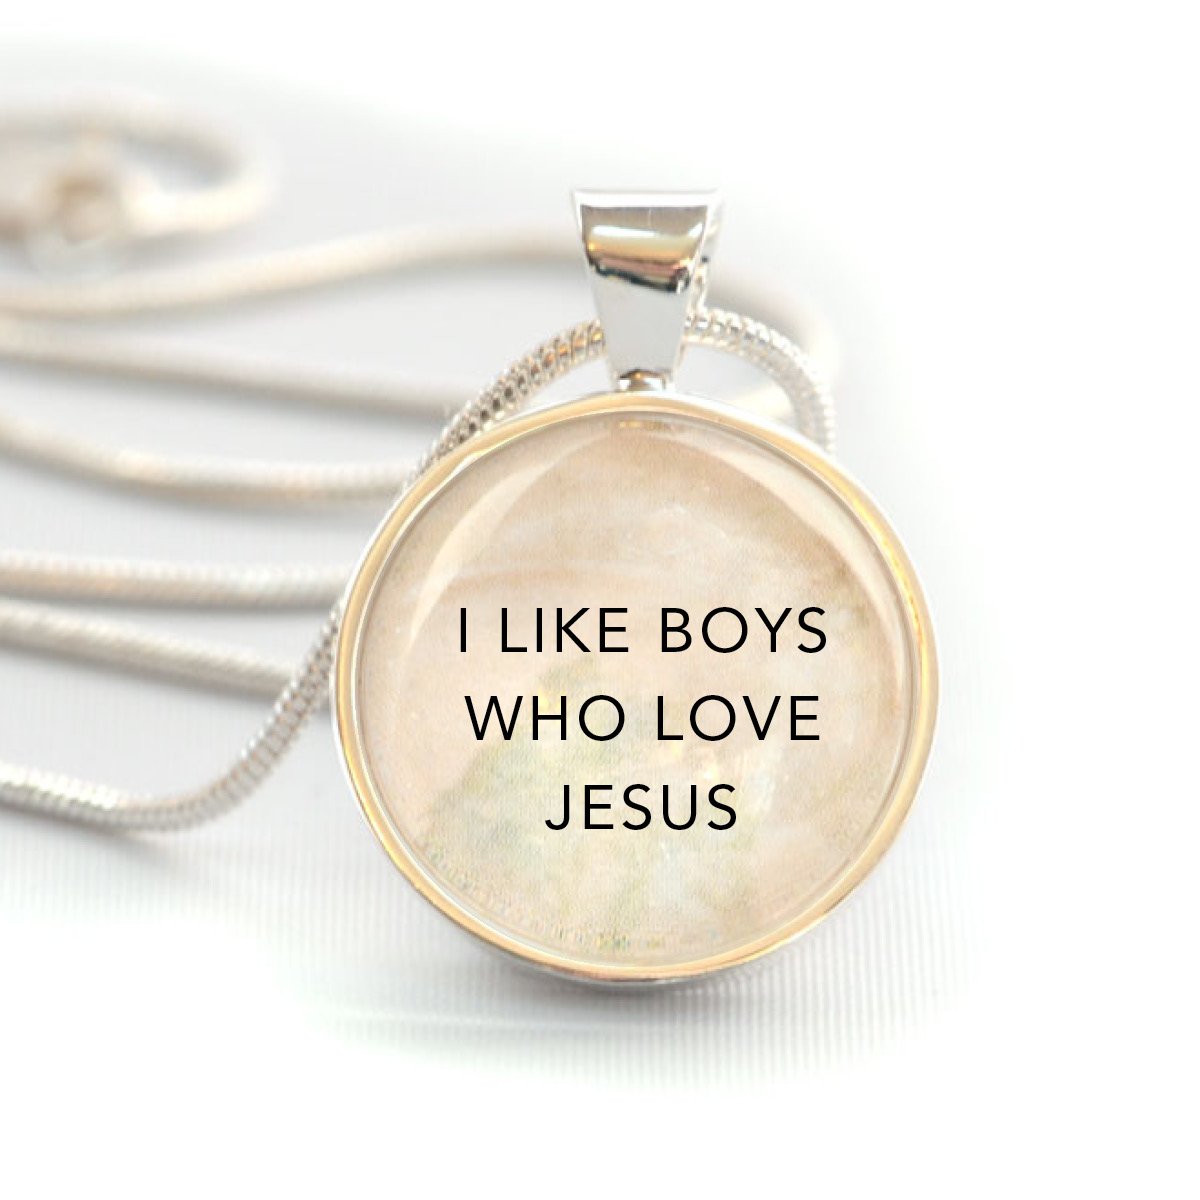 I Like Boys Who Love Jesus Silver-Plated Pendant Necklace for Christian Girls - Necklaces - Bijou Her -  -  - 